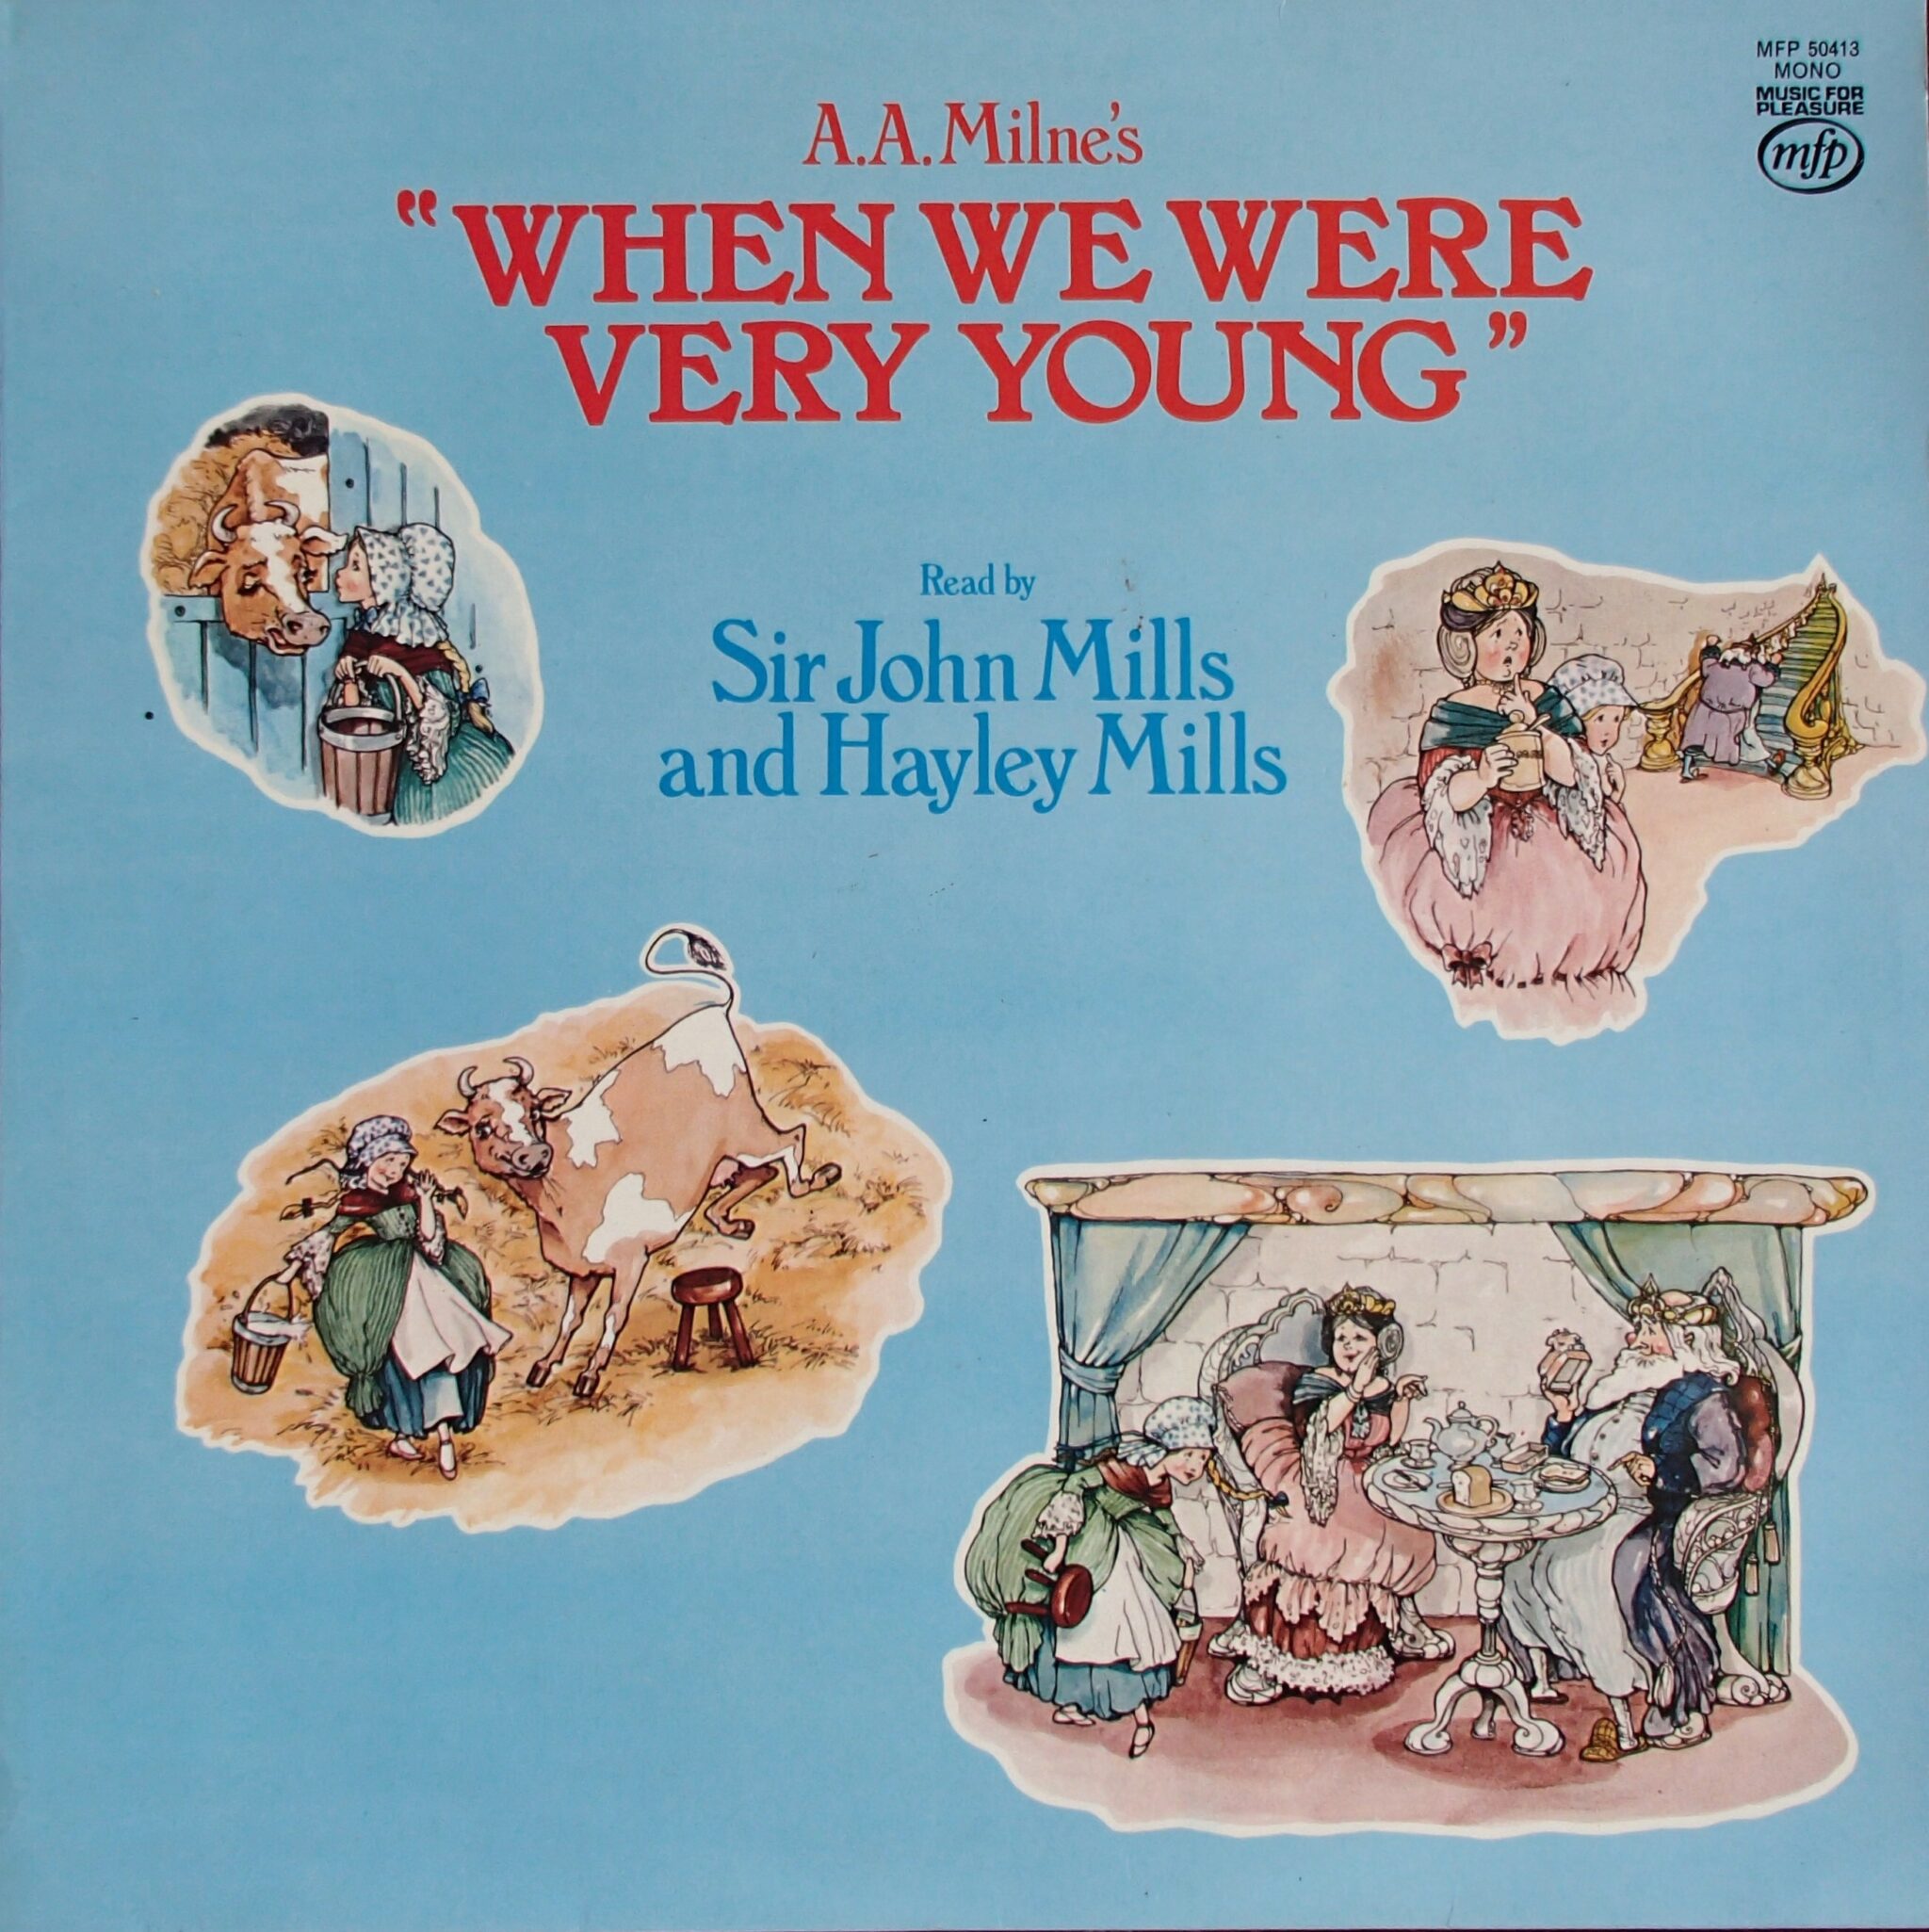 A.A. Milne's "When We Were Very Young"